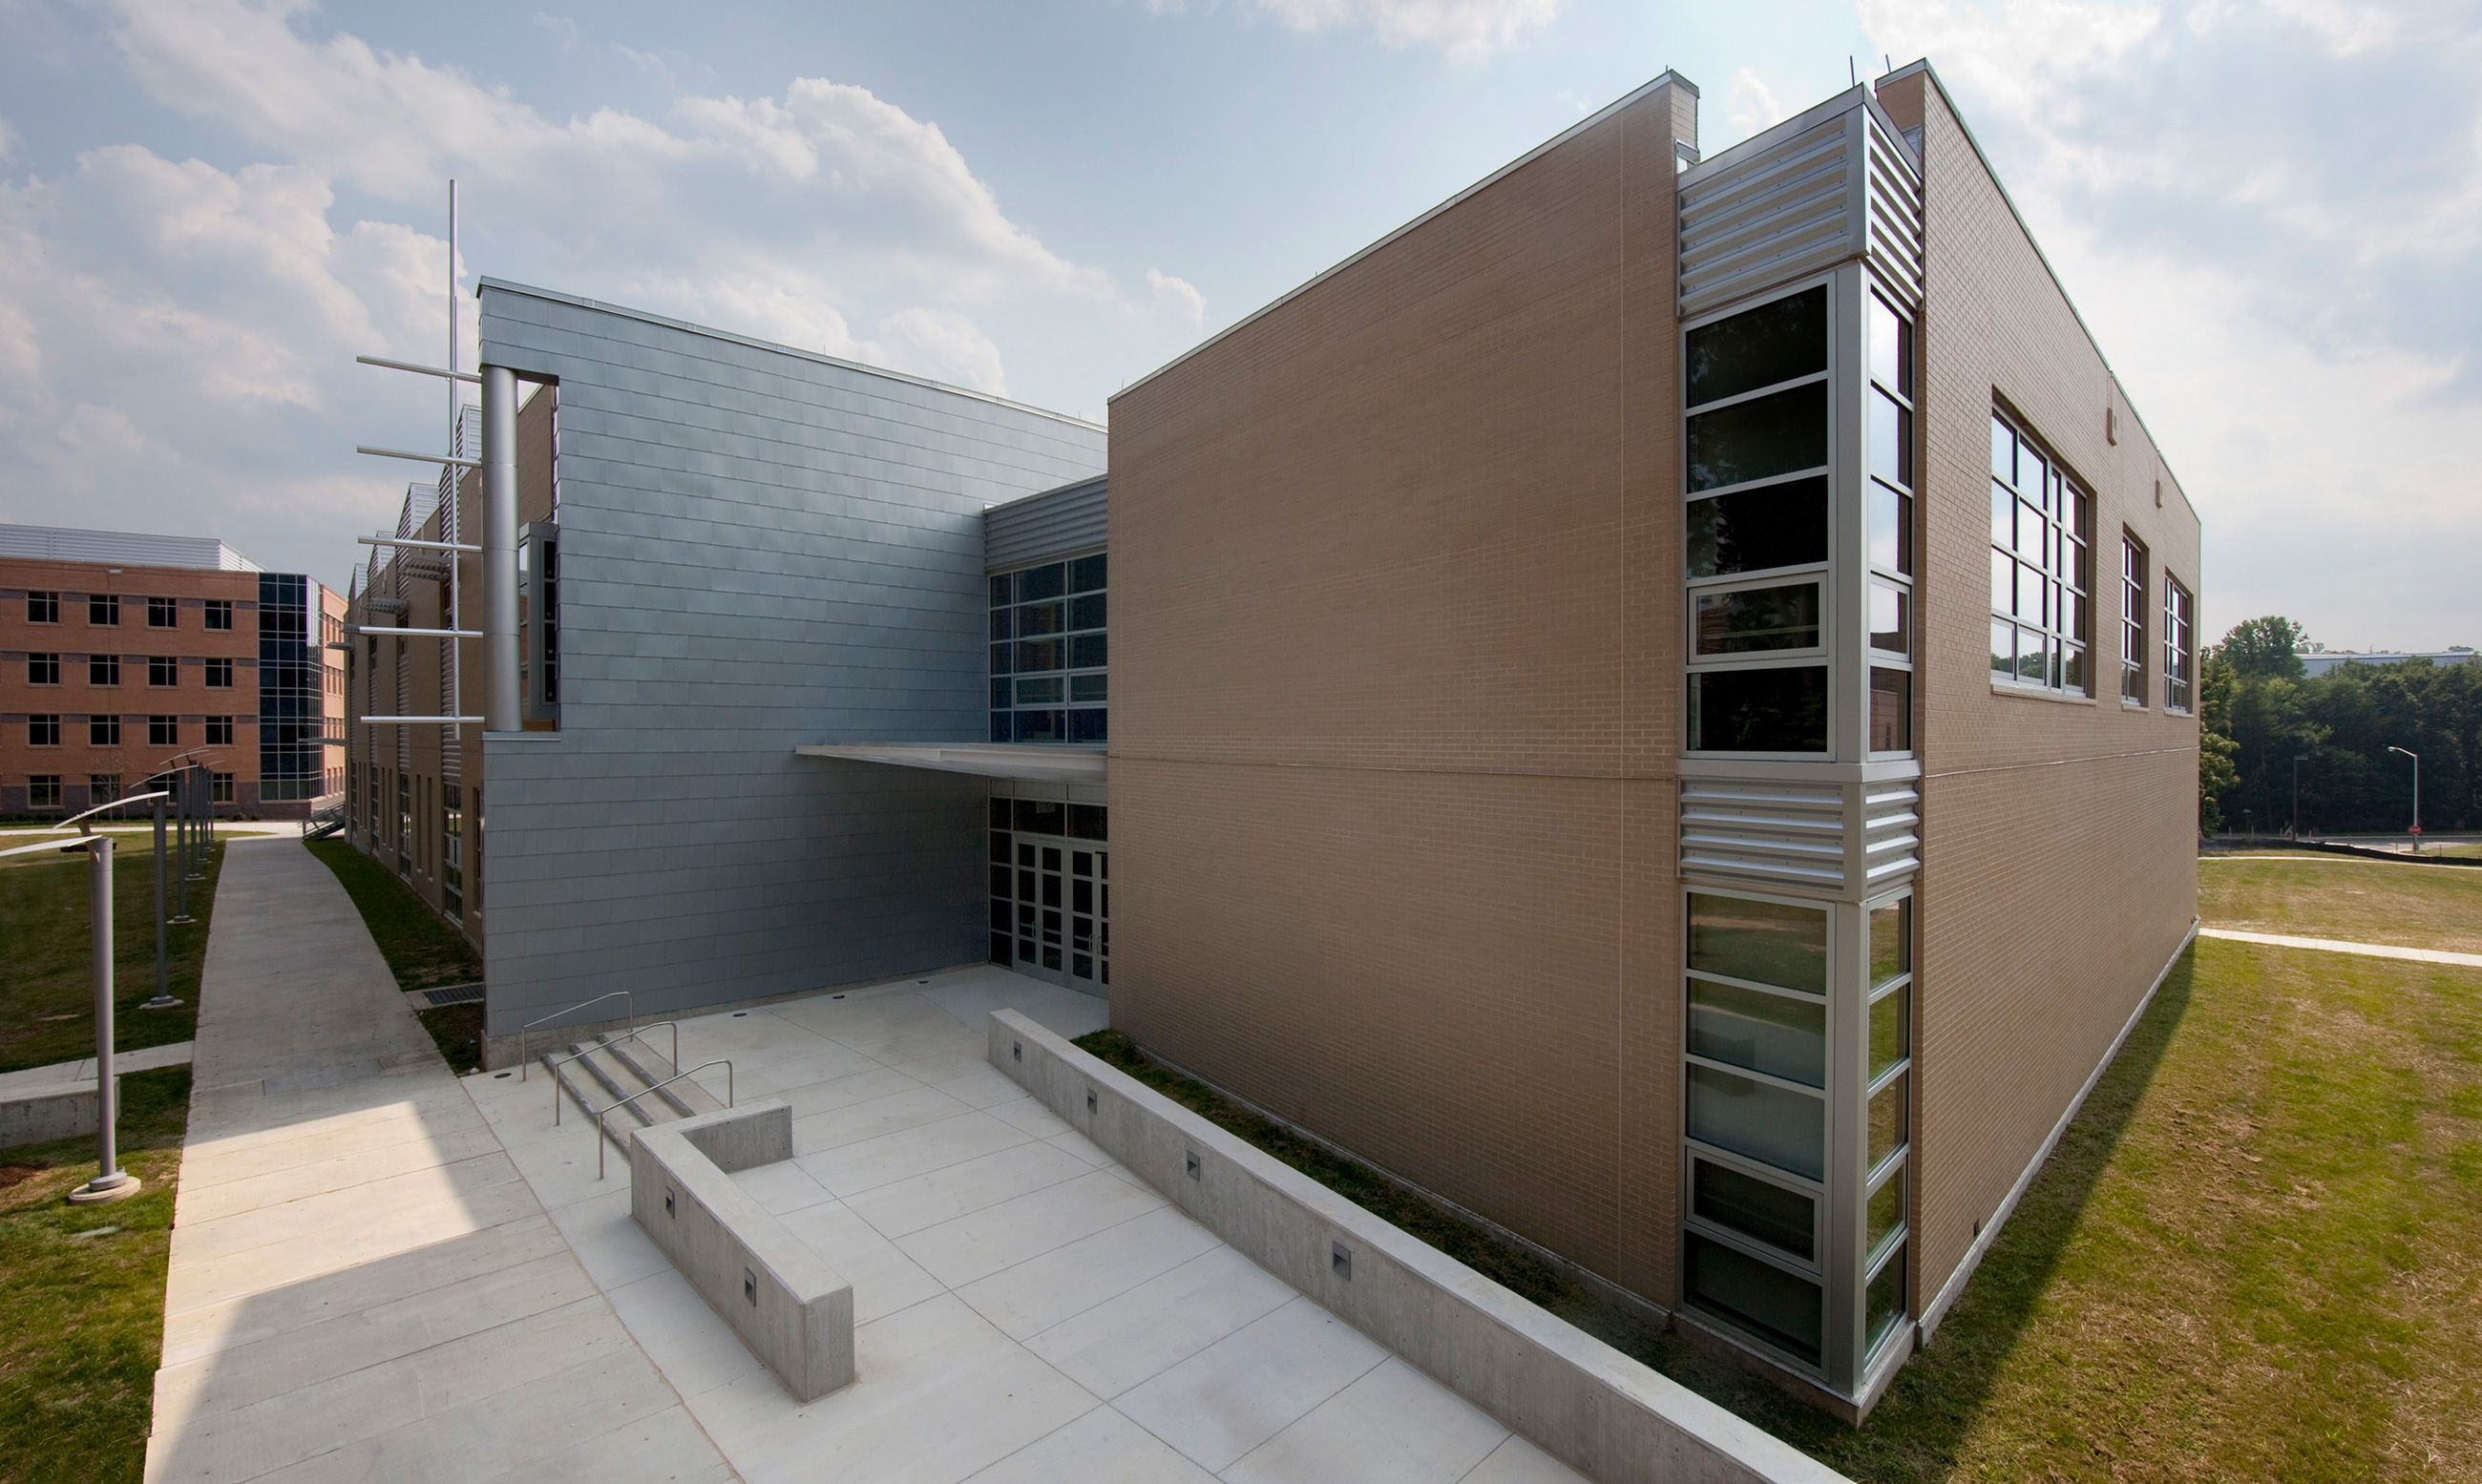 The Art and Design building, designed by Ayers Saint Gross, is an 88,000-square-foot facility.